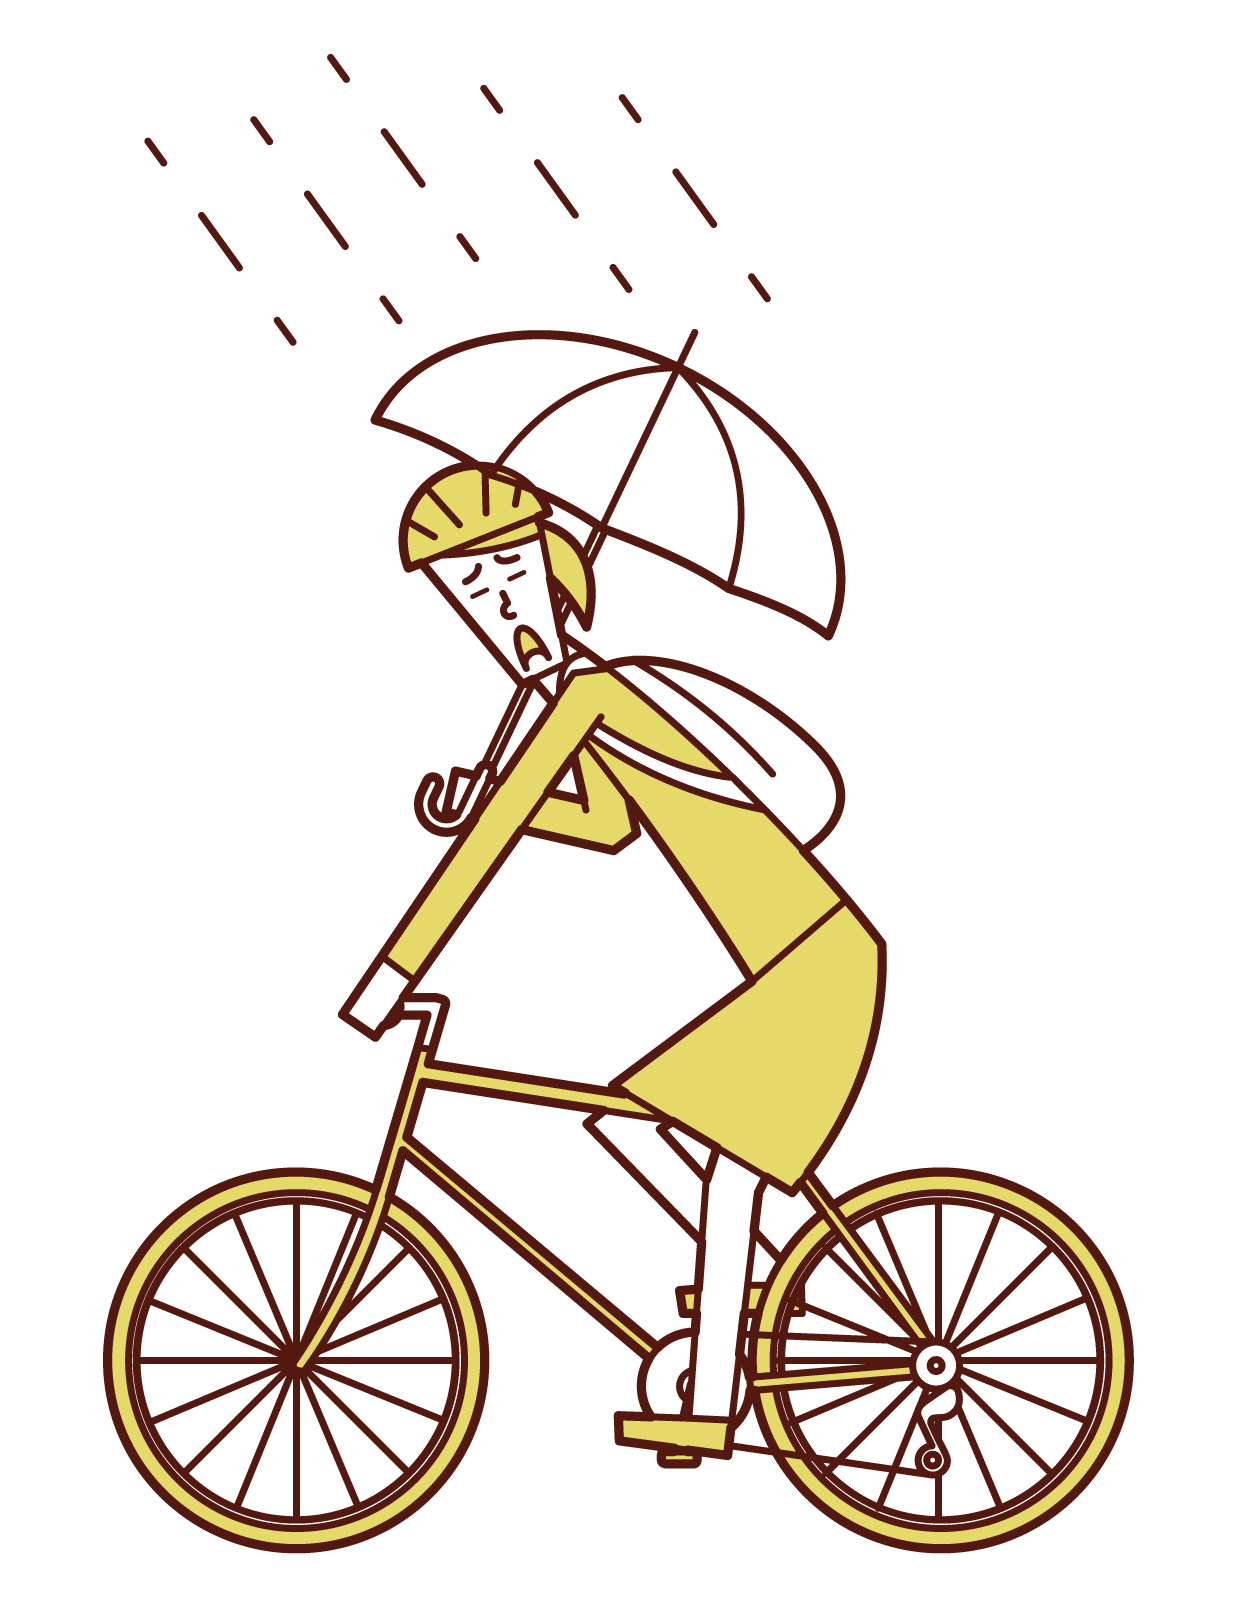 Illustration of a woman driving a bicycle while holding an umbrella